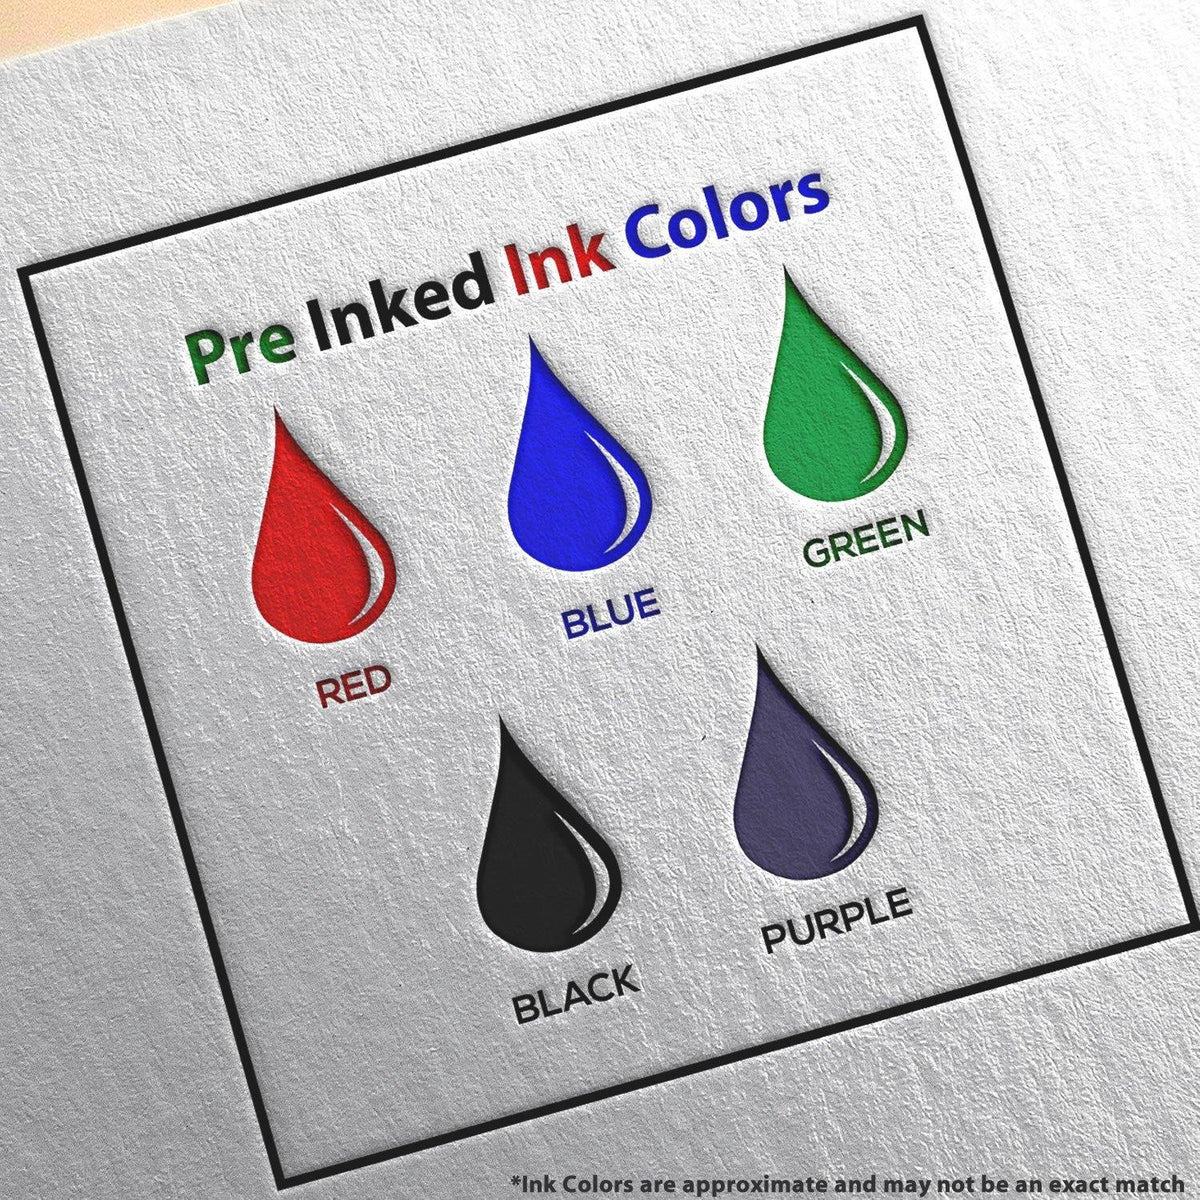 Slim Pre-Inked Courtesy Copy Original Filed Electronically Stamp Ink Color Options